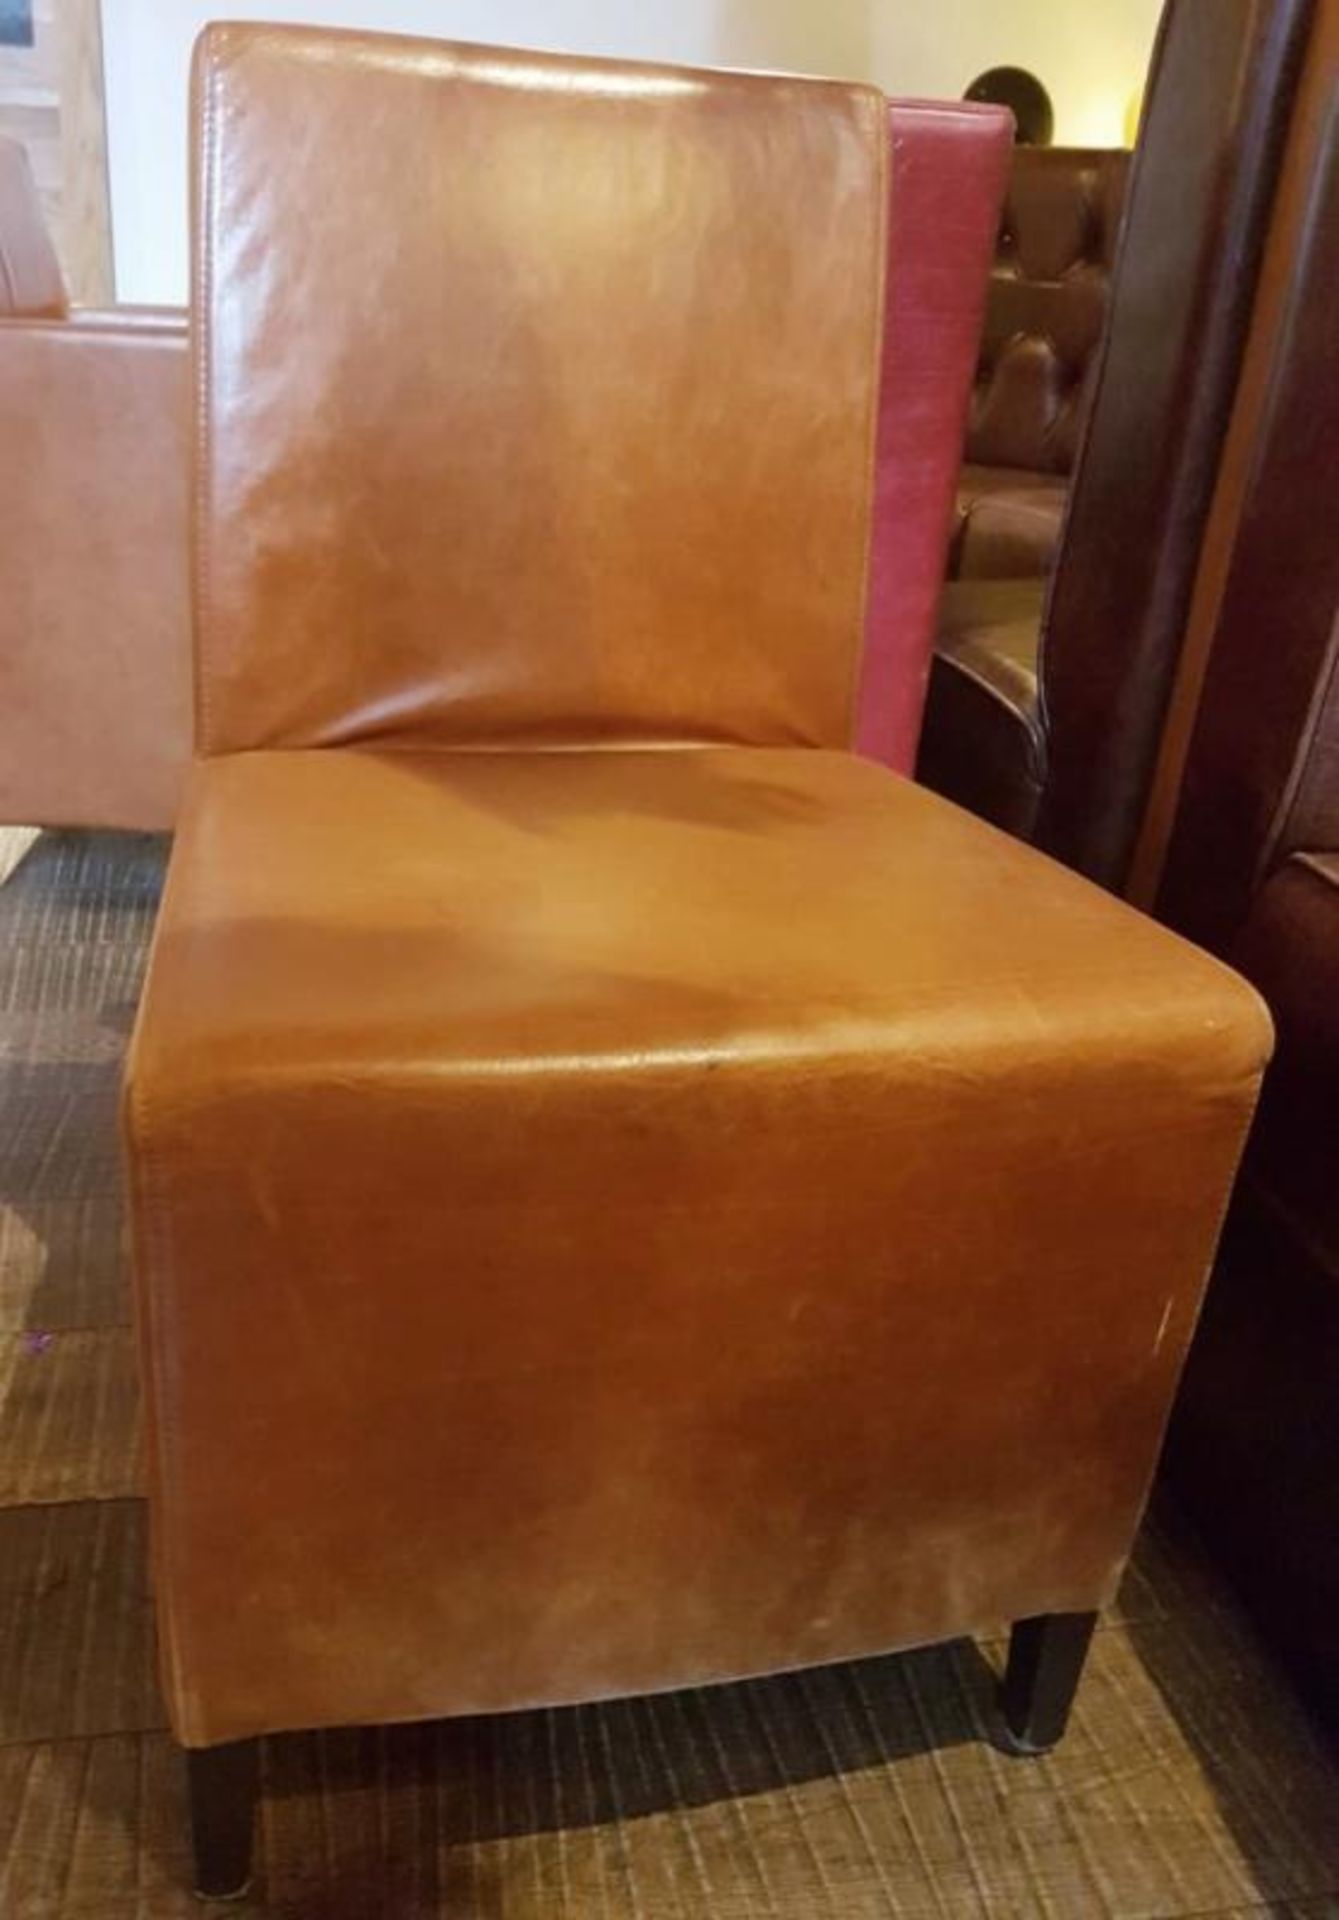 4 x Leather Upholstered Chairs In Tan - Recently Removed From A City Centre Steakhouse Restaurant - - Image 3 of 6